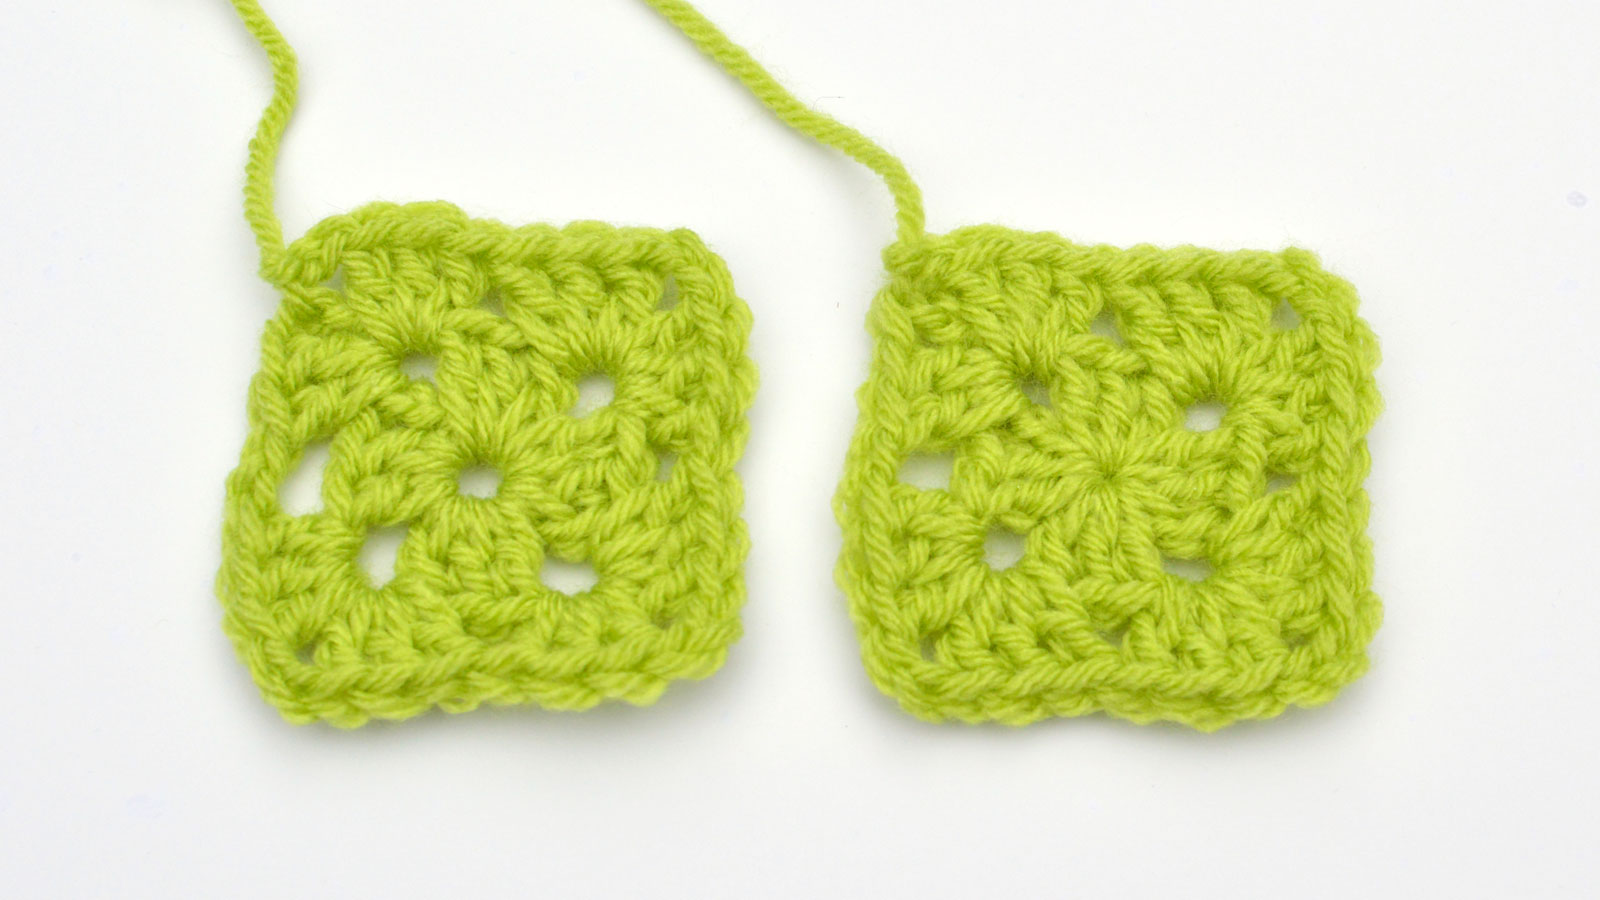 secret-to-great-granny-squares-crochet-by-darleen-hopkins-2